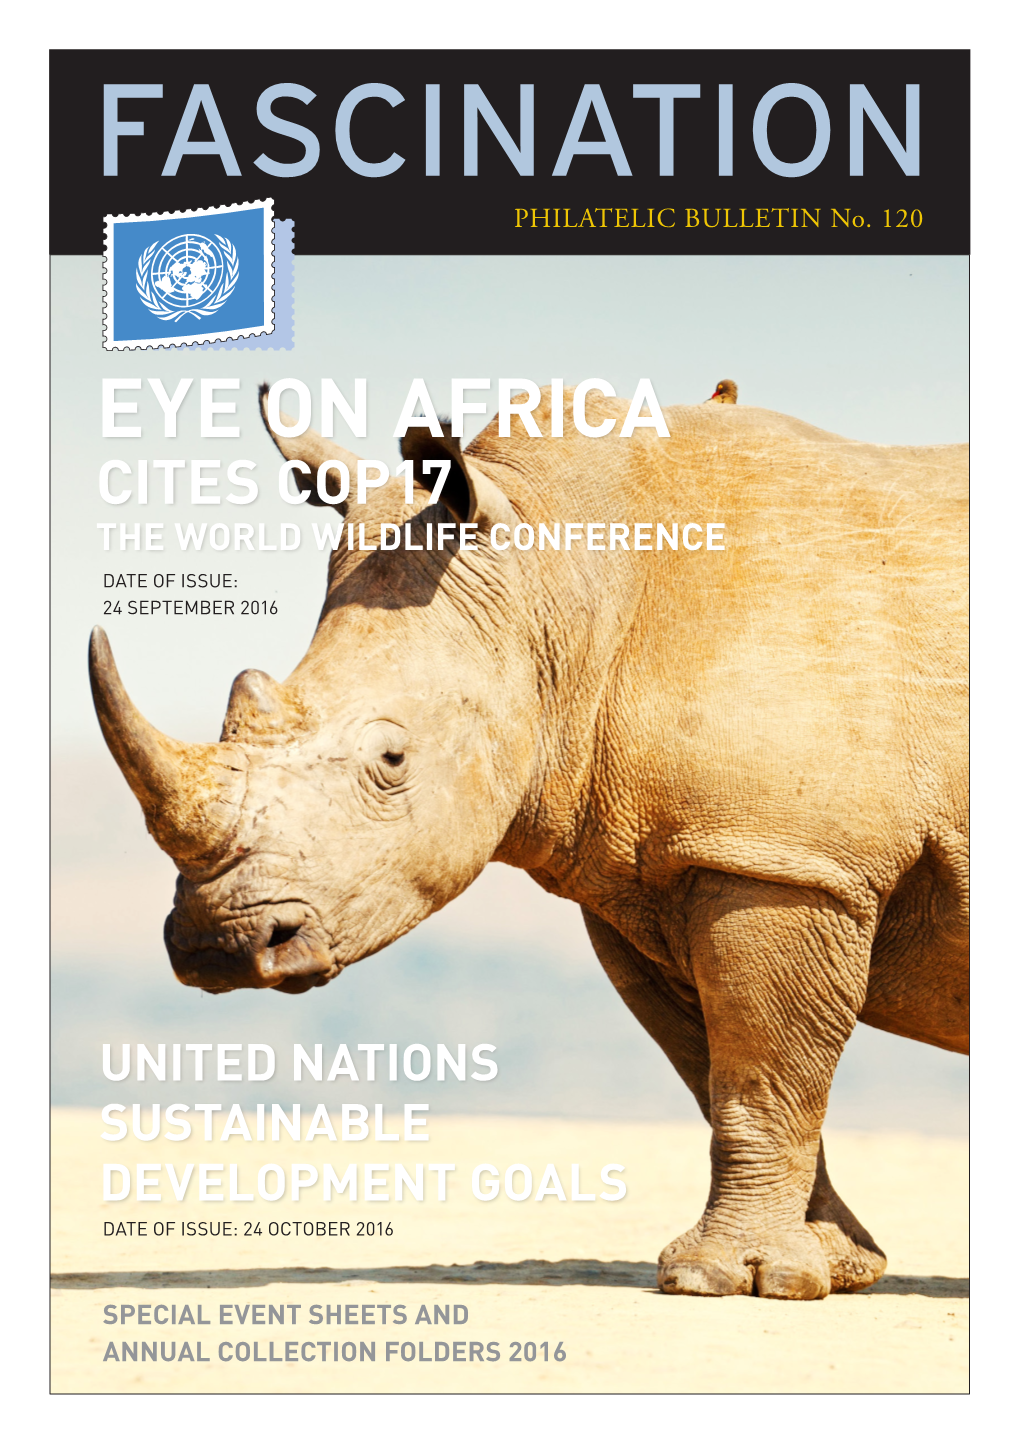 Eye on Africa Cites Cop17 the World Wildlife Conference Date of Issue: 24 September 2016